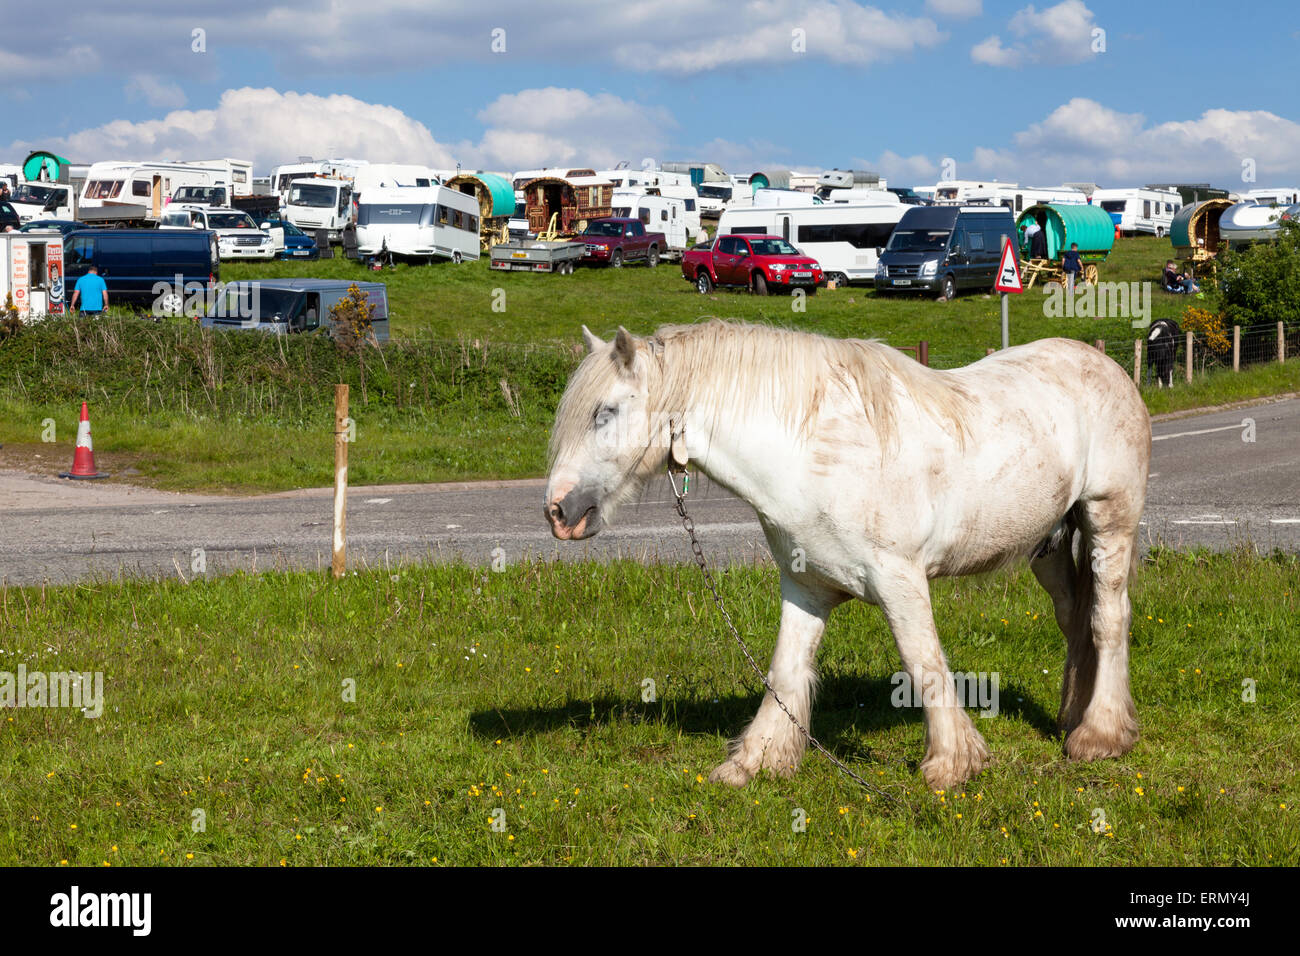 Appleby-in-Westmorland, U.K. 4th June 2015. Gypsies camp at the Appleby Horse Fair. The fair has existed since 1685 under the protection of a charter granted by King James II. Starting the first Thursday in June and running for a week the fair is visited by Romany Gypsies, Horse Dealers and Travellers from across Europe. Credit:  Mark Richardson/Alamy Live News Stock Photo